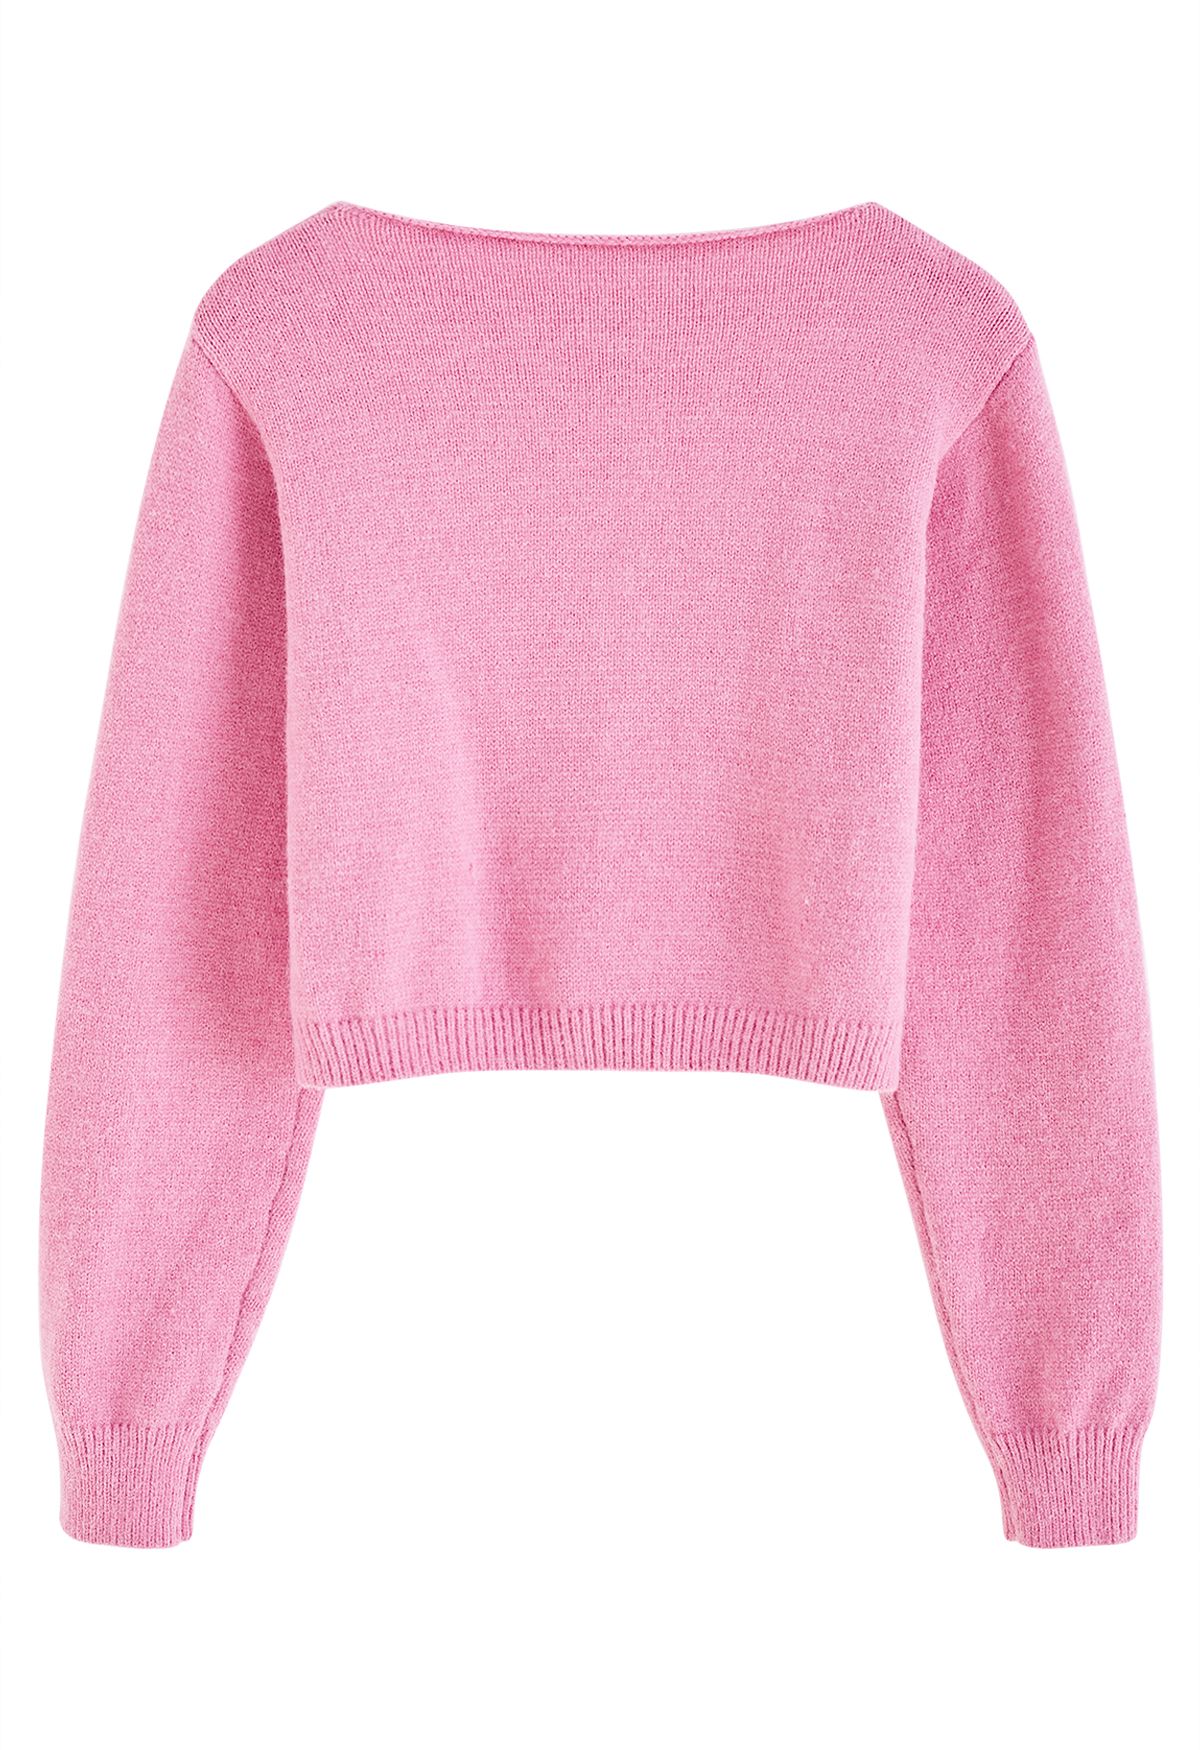 Buttoned Front Rib Crop Cardigan in Pink